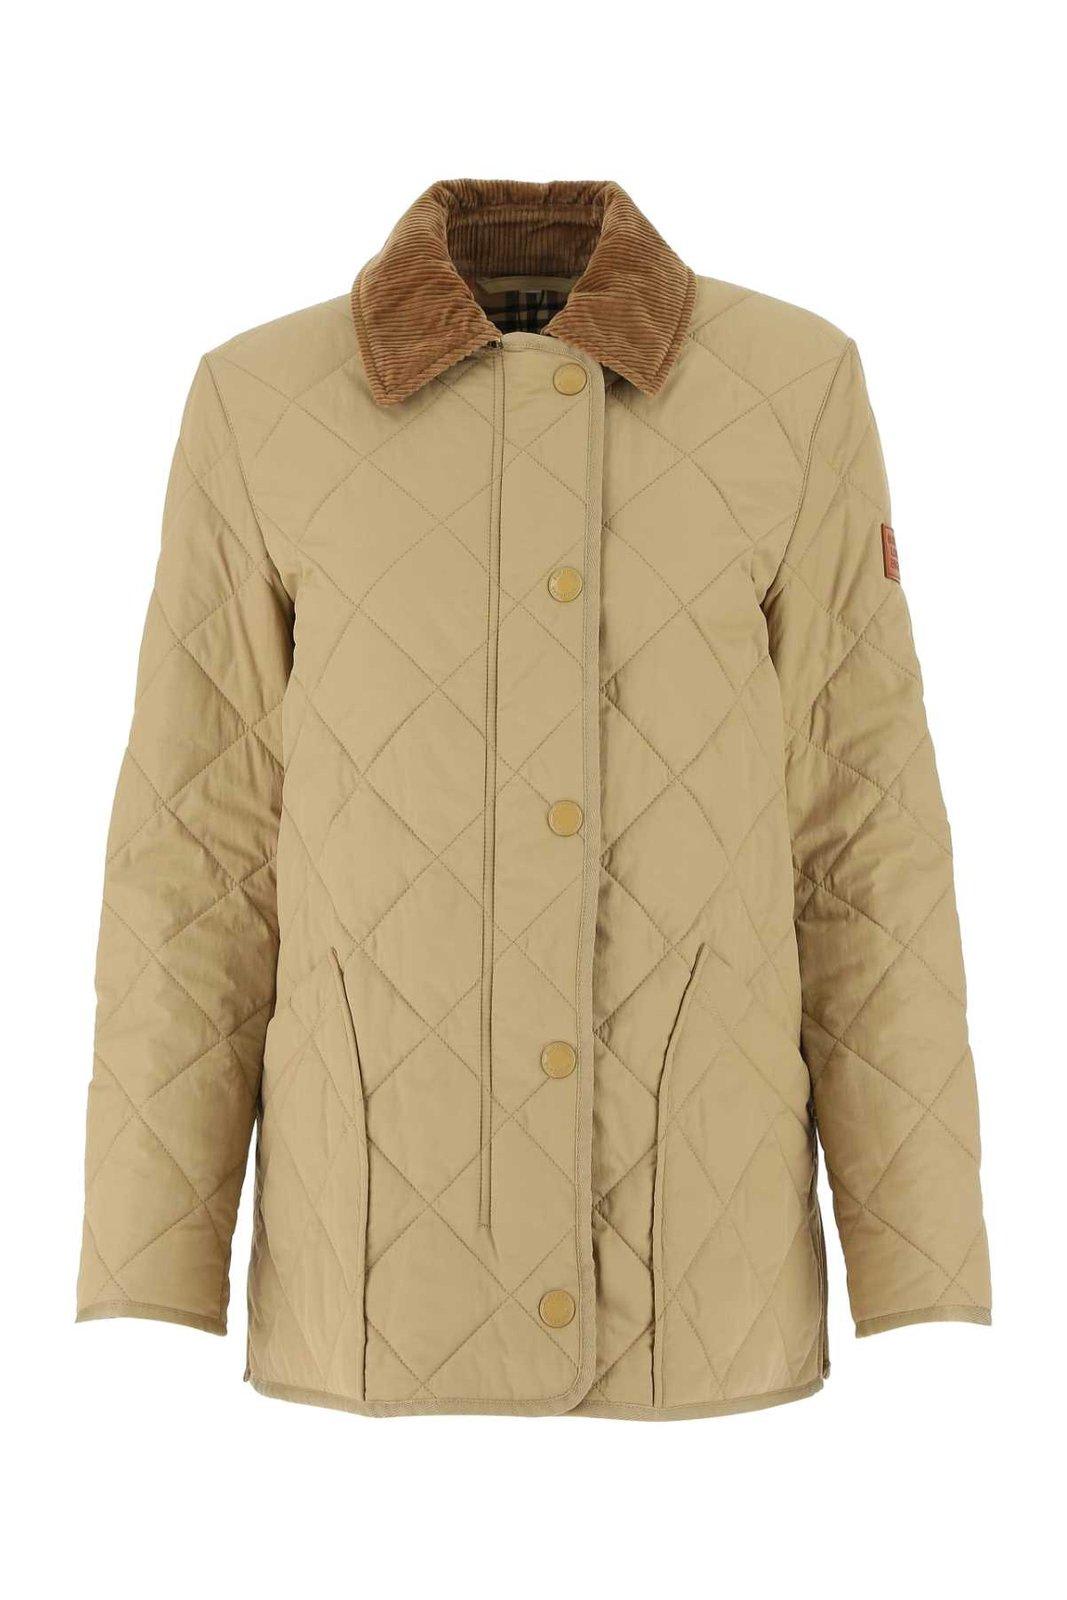 Burberry Diamond Quilted Buttoned Jacket